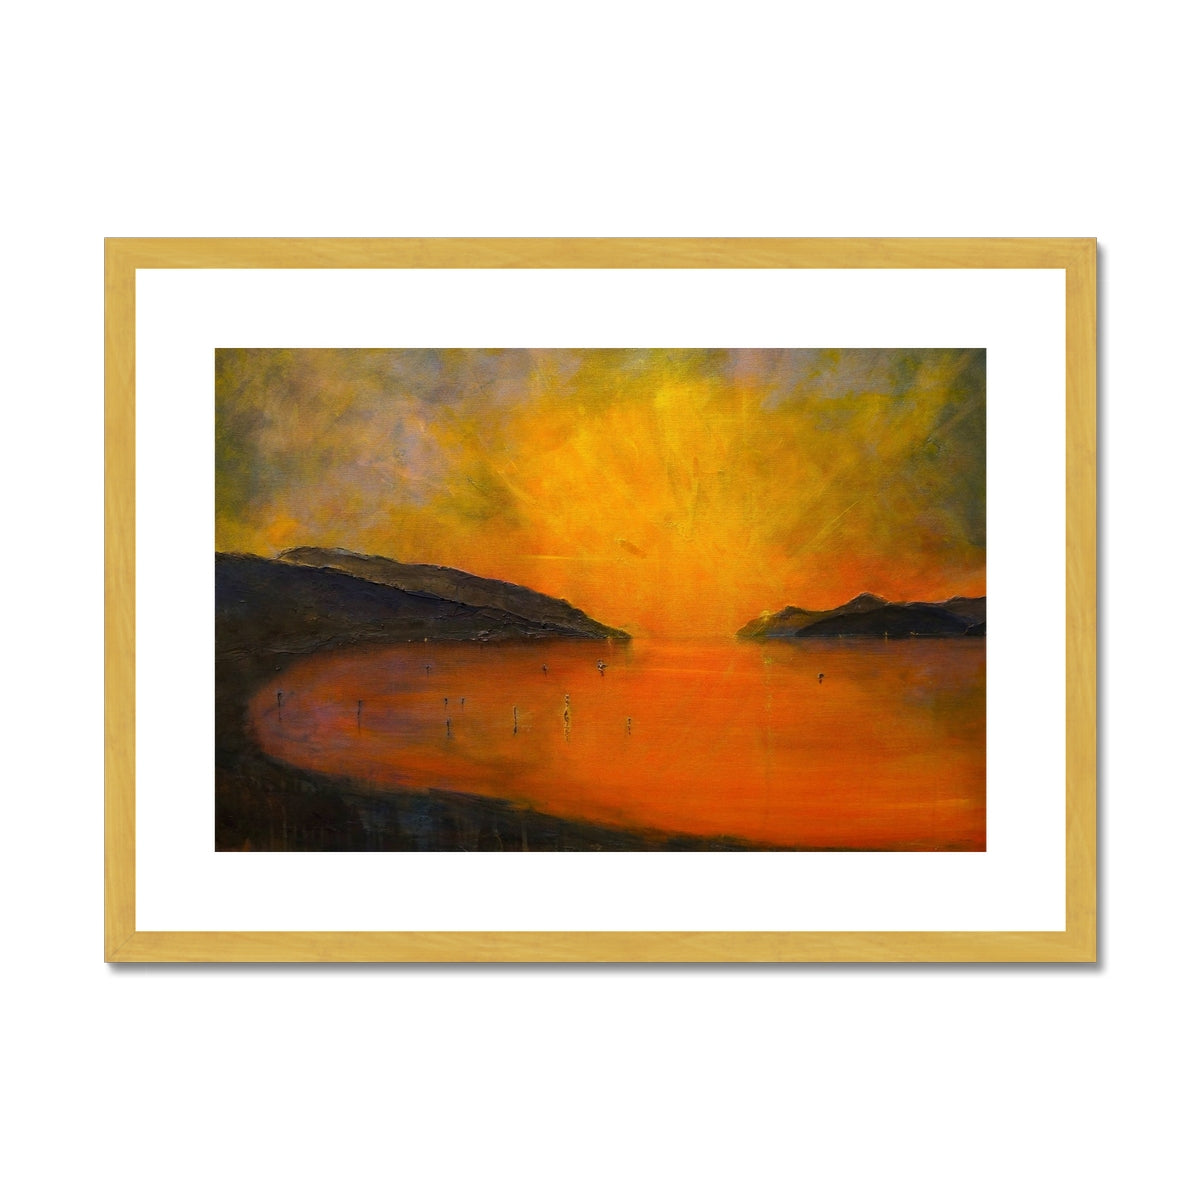 Loch Ness Sunset Painting | Antique Framed & Mounted Prints From Scotland-Fine art-Scottish Lochs & Mountains Art Gallery-A2 Landscape-Gold Frame-Paintings, Prints, Homeware, Art Gifts From Scotland By Scottish Artist Kevin Hunter